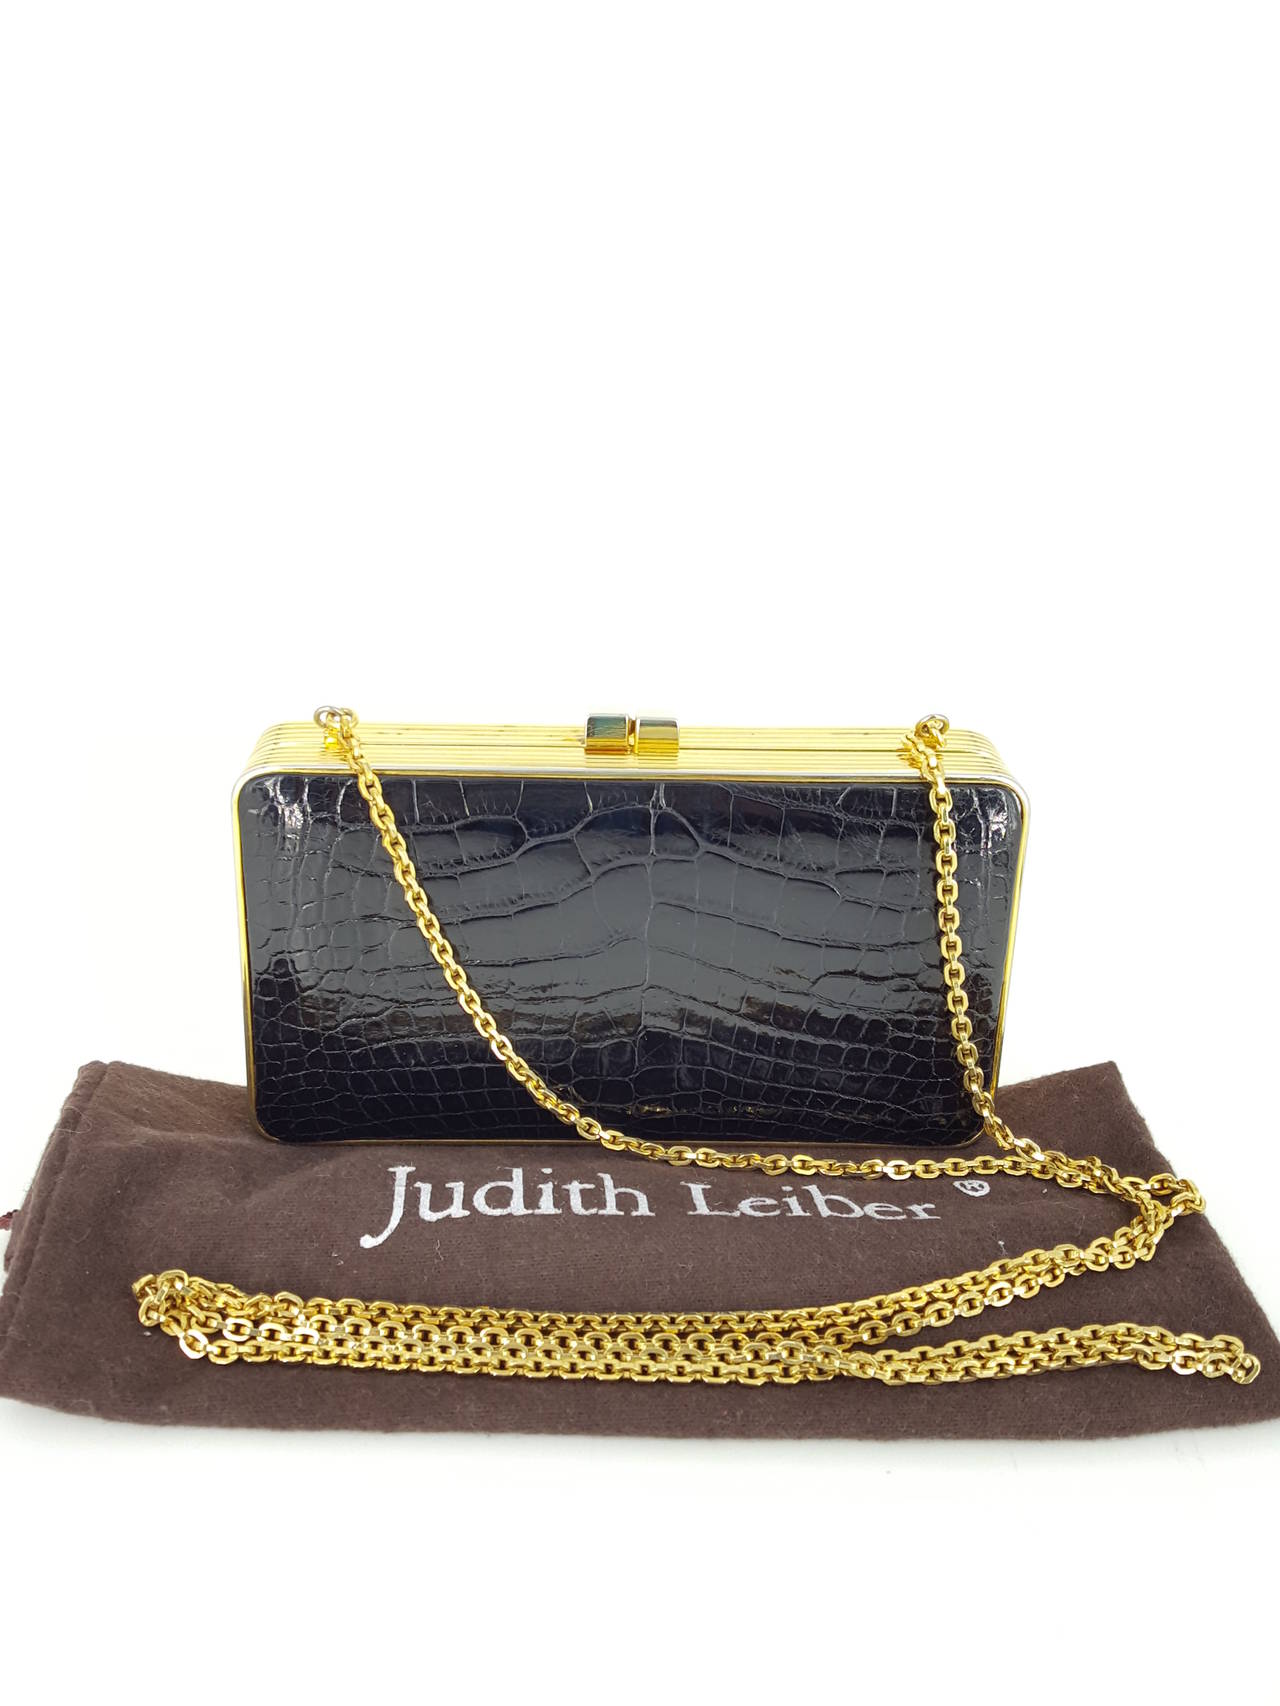 Judith Leiber Shiney Black Alligator Evening Bag/Clutch With Gold Chain. In Good Condition For Sale In Delray Beach, FL